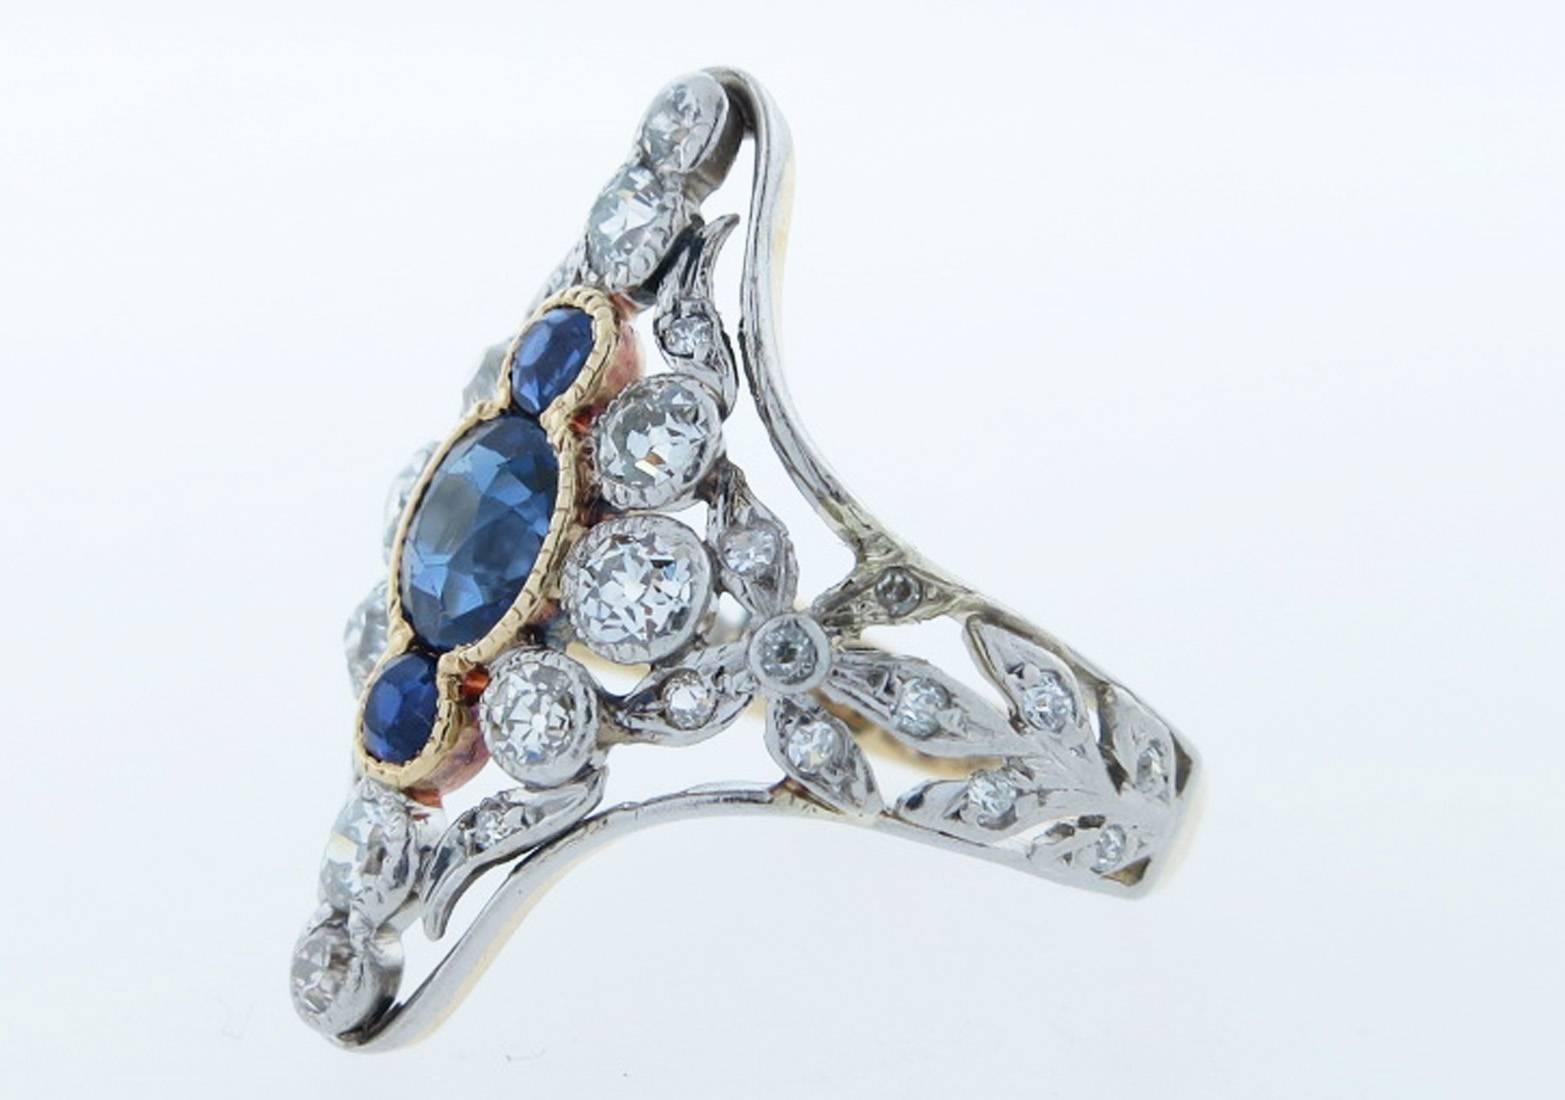 Radiant handmade platinum top and 18kt yellow gold back Edwardian dinner style ring. The center is set in yellow gold with three natural faceted fine blue sapphires totaling approx .80cts. The mount is bead and bezel set with thirty four old cut